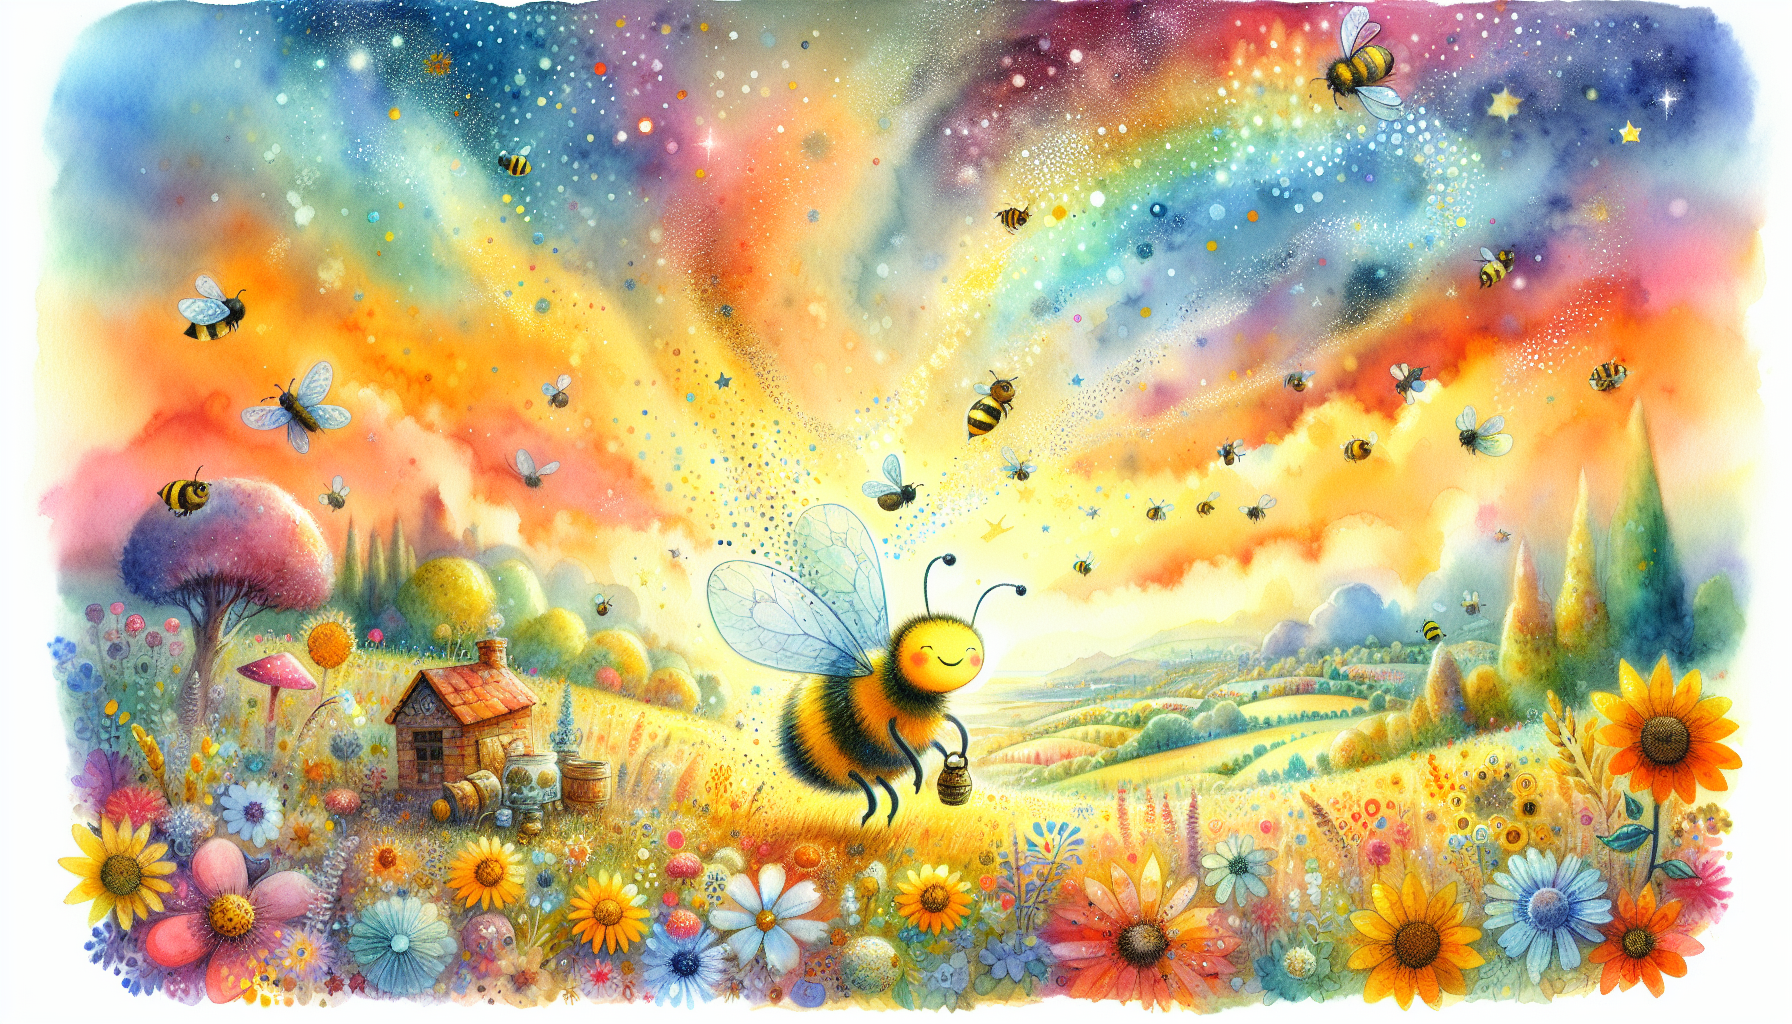 The Benevolent Bee Pollinating Acts of Giving